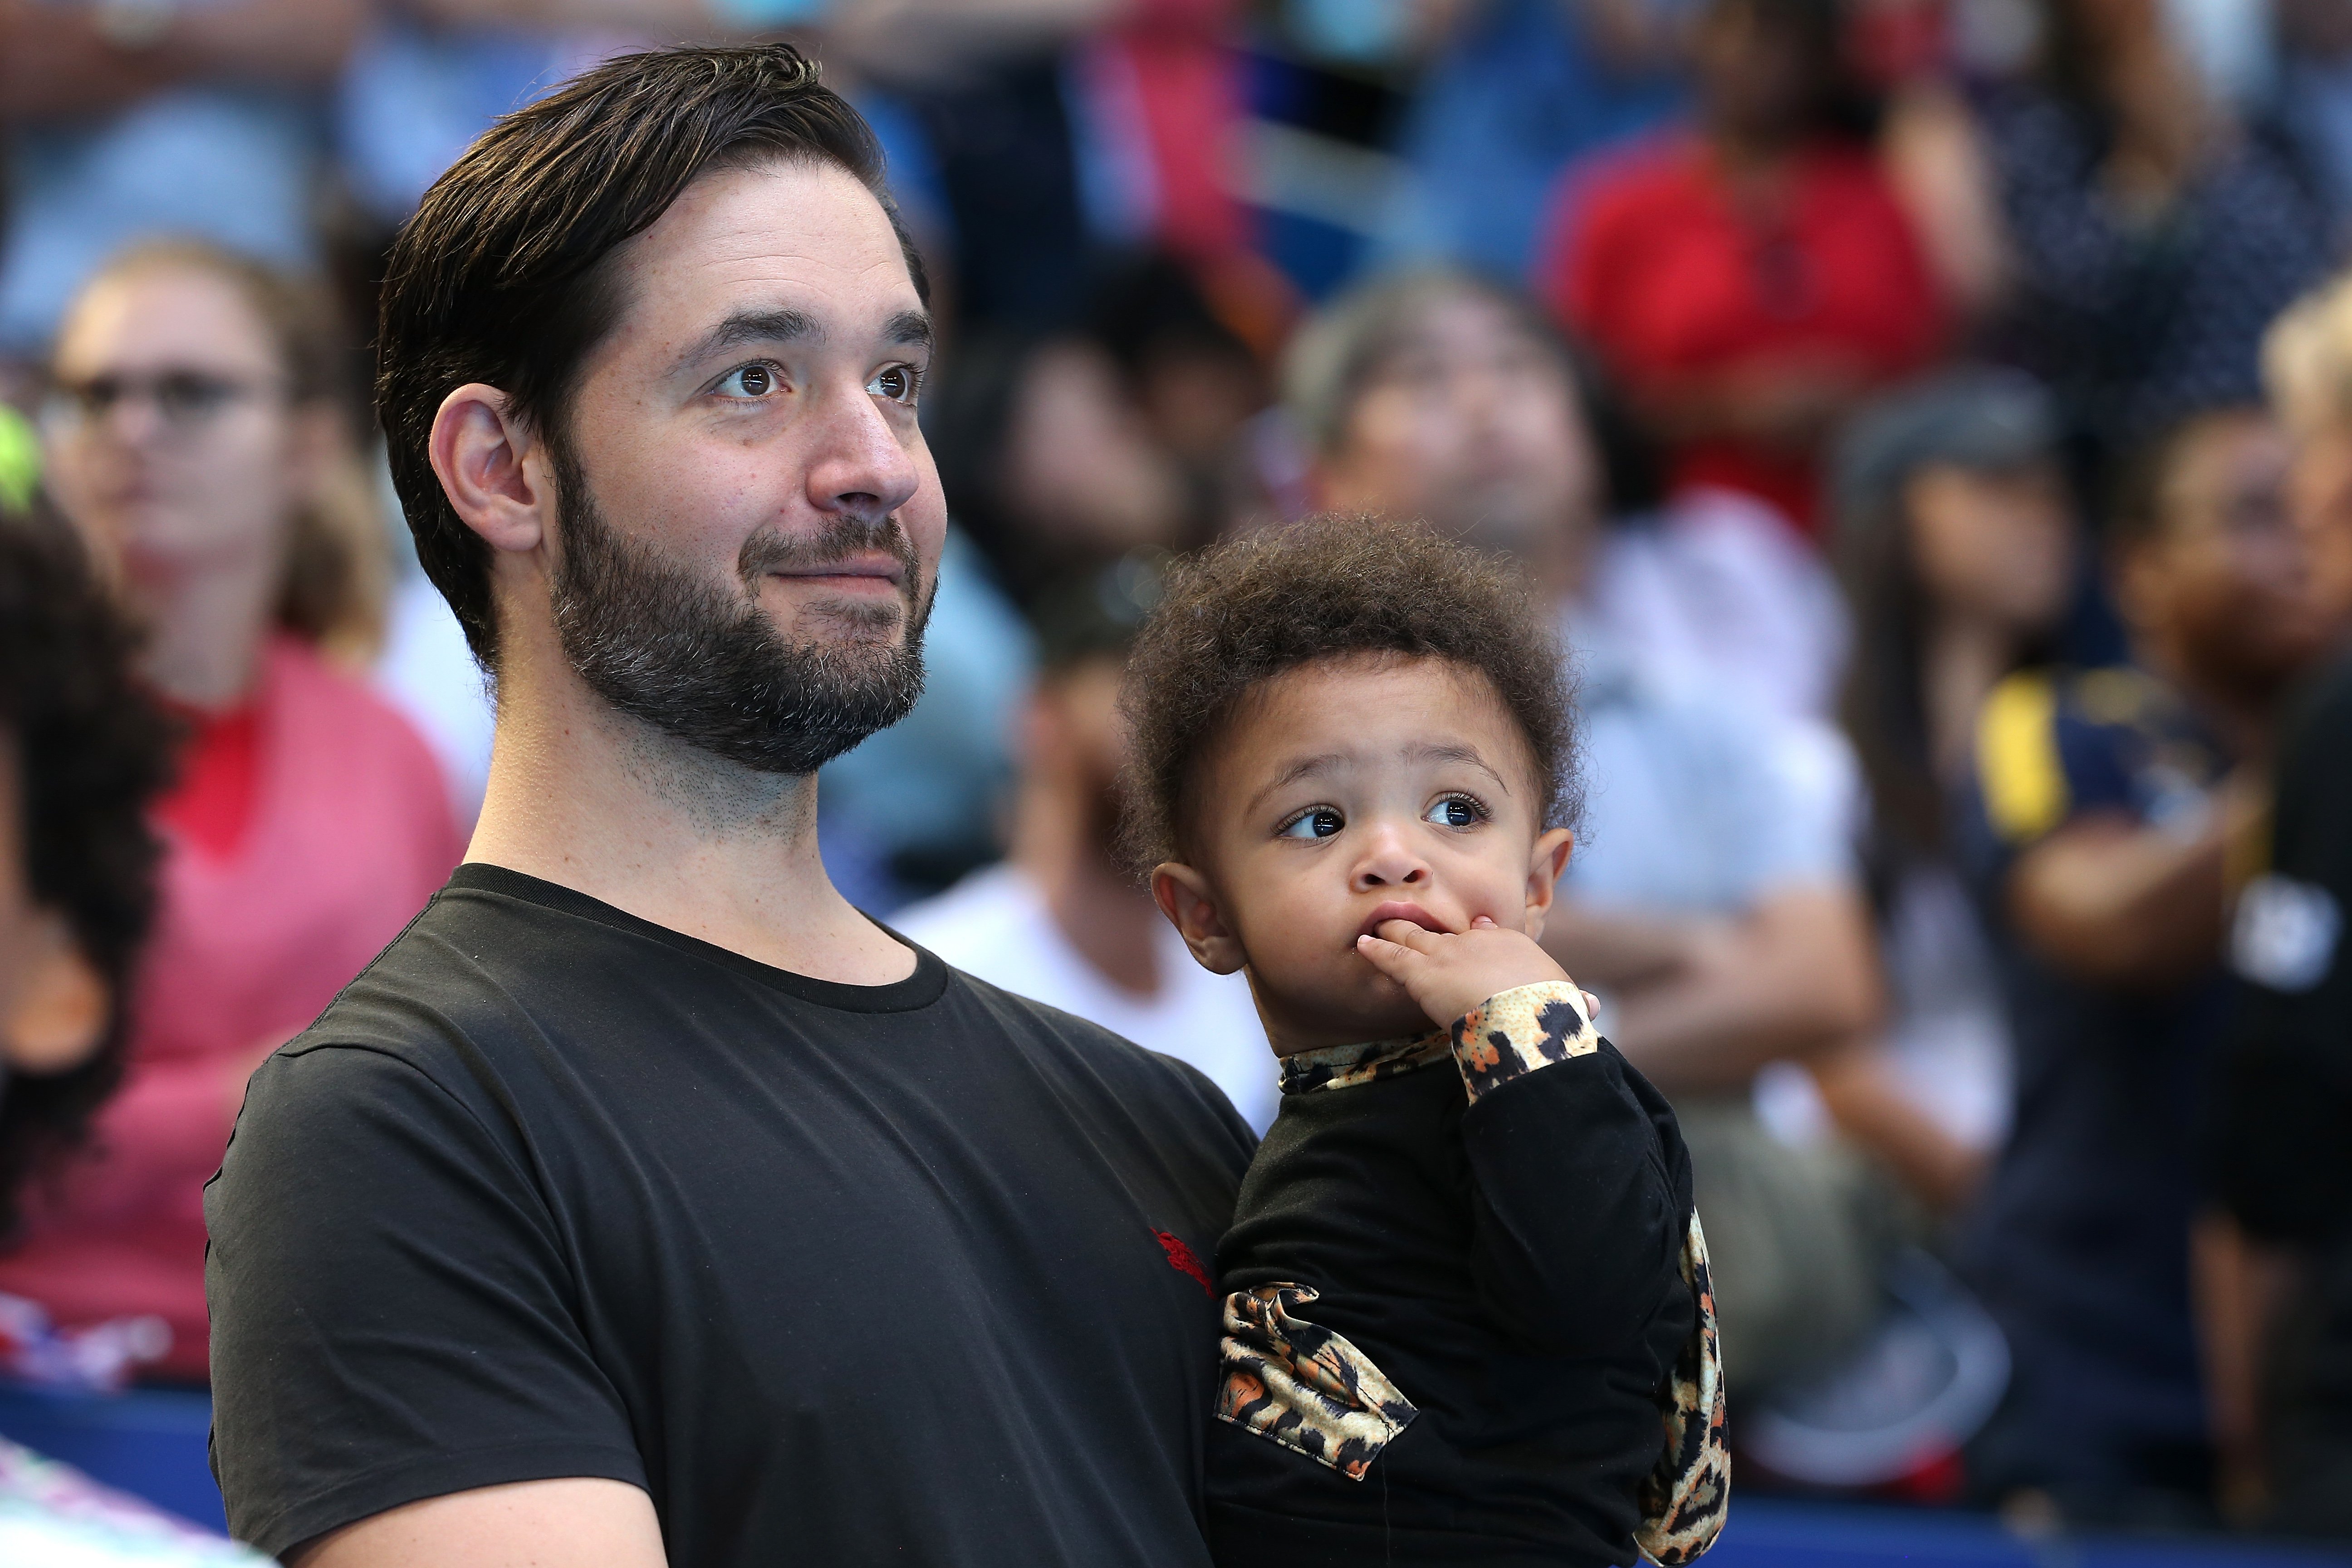 Alexis Ohanian & Olympia Ohanian watch Serena Williams during the 2019 Hopman Cup on Jan. 03, 2019 in Perth, Australia | Photo: Getty Images